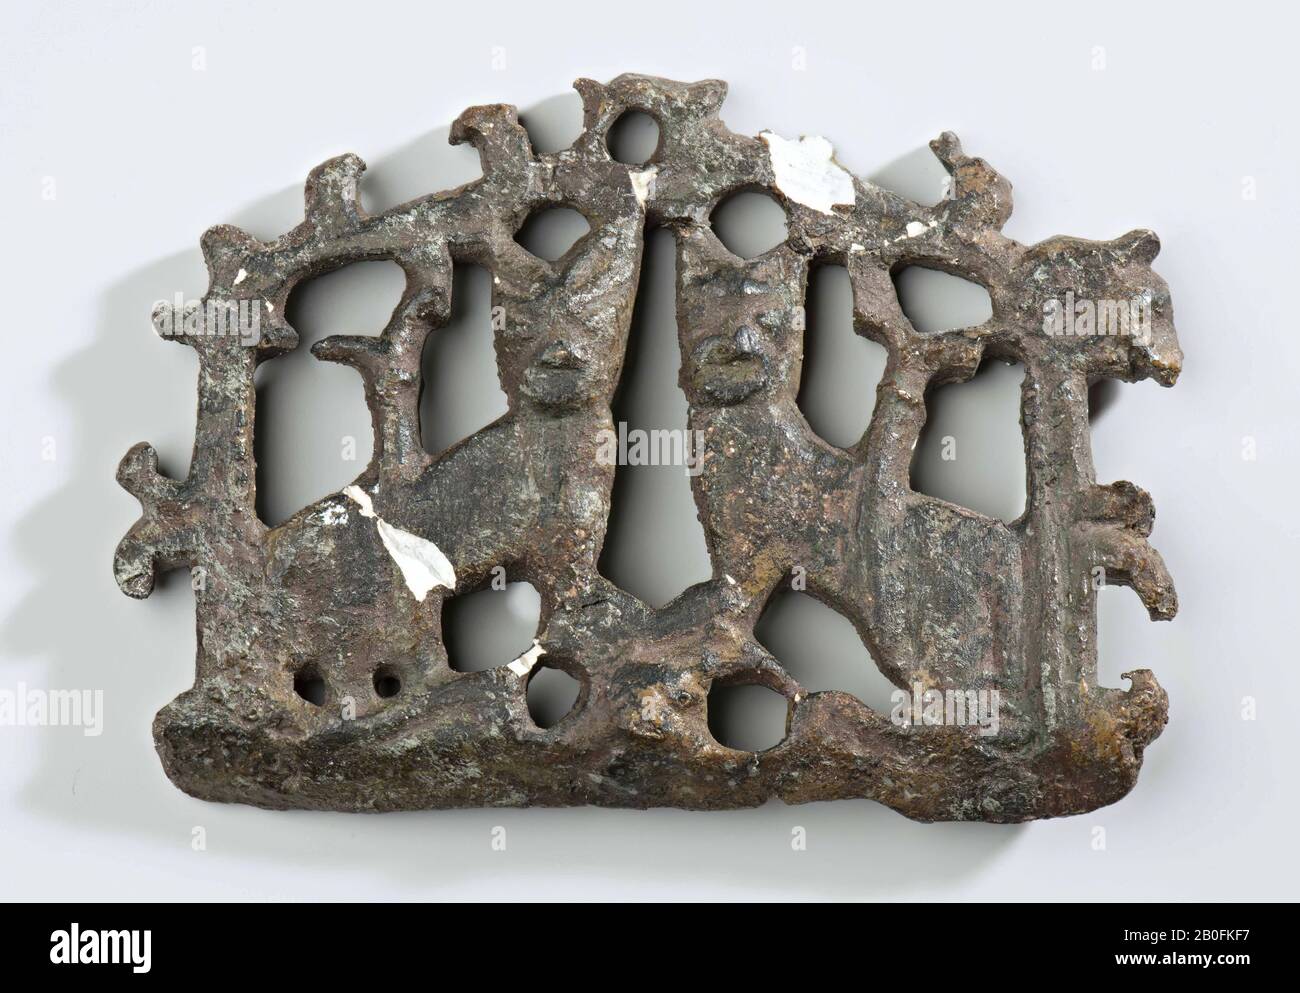 The Netherlands Middle Ages, buckle, fittings, cabinet fittings, 4.8 x 6.6 cm, 9.7 grams, vmec, the Netherlands, Zeeland, Schouwen-Duiveland, Burgh Stock Photo